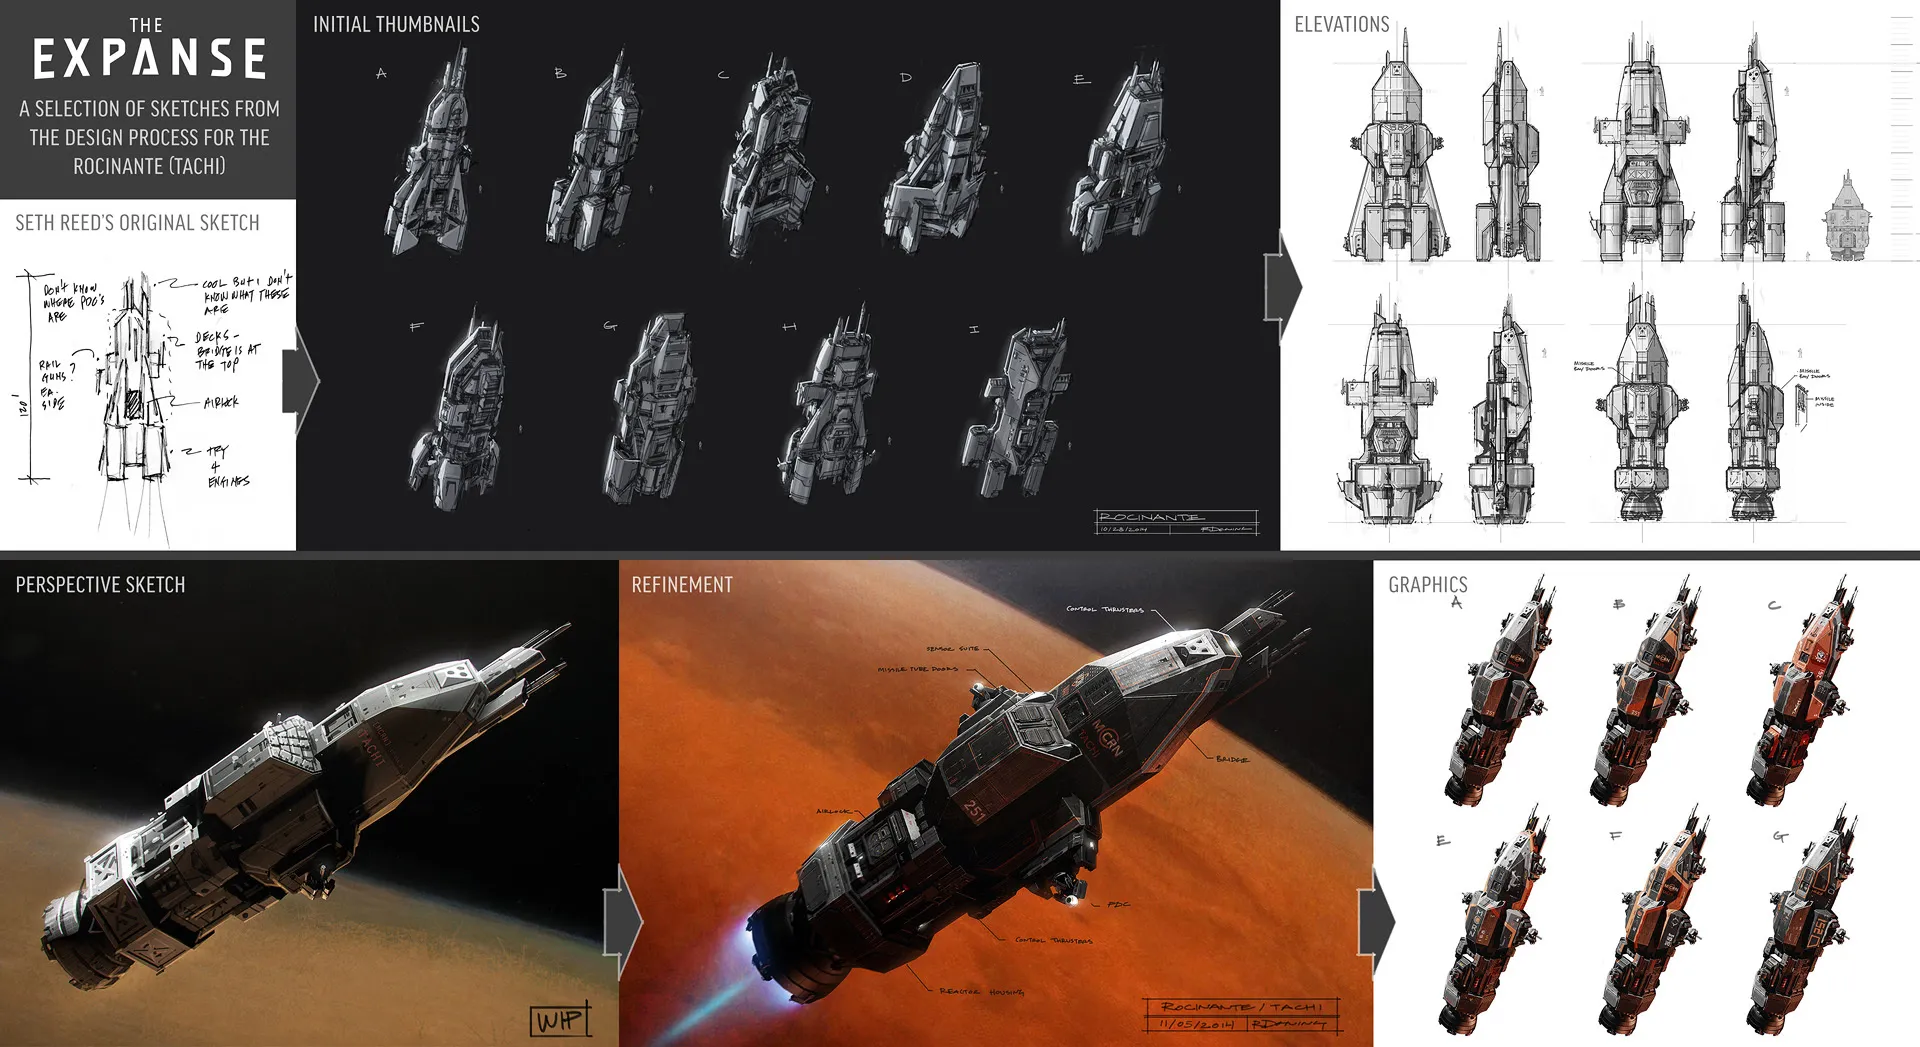 The evolution of the Rocinante: Seth Reed's initial sketch, North Front's early variants, elevations, block-in and refined models, and graphics pass.